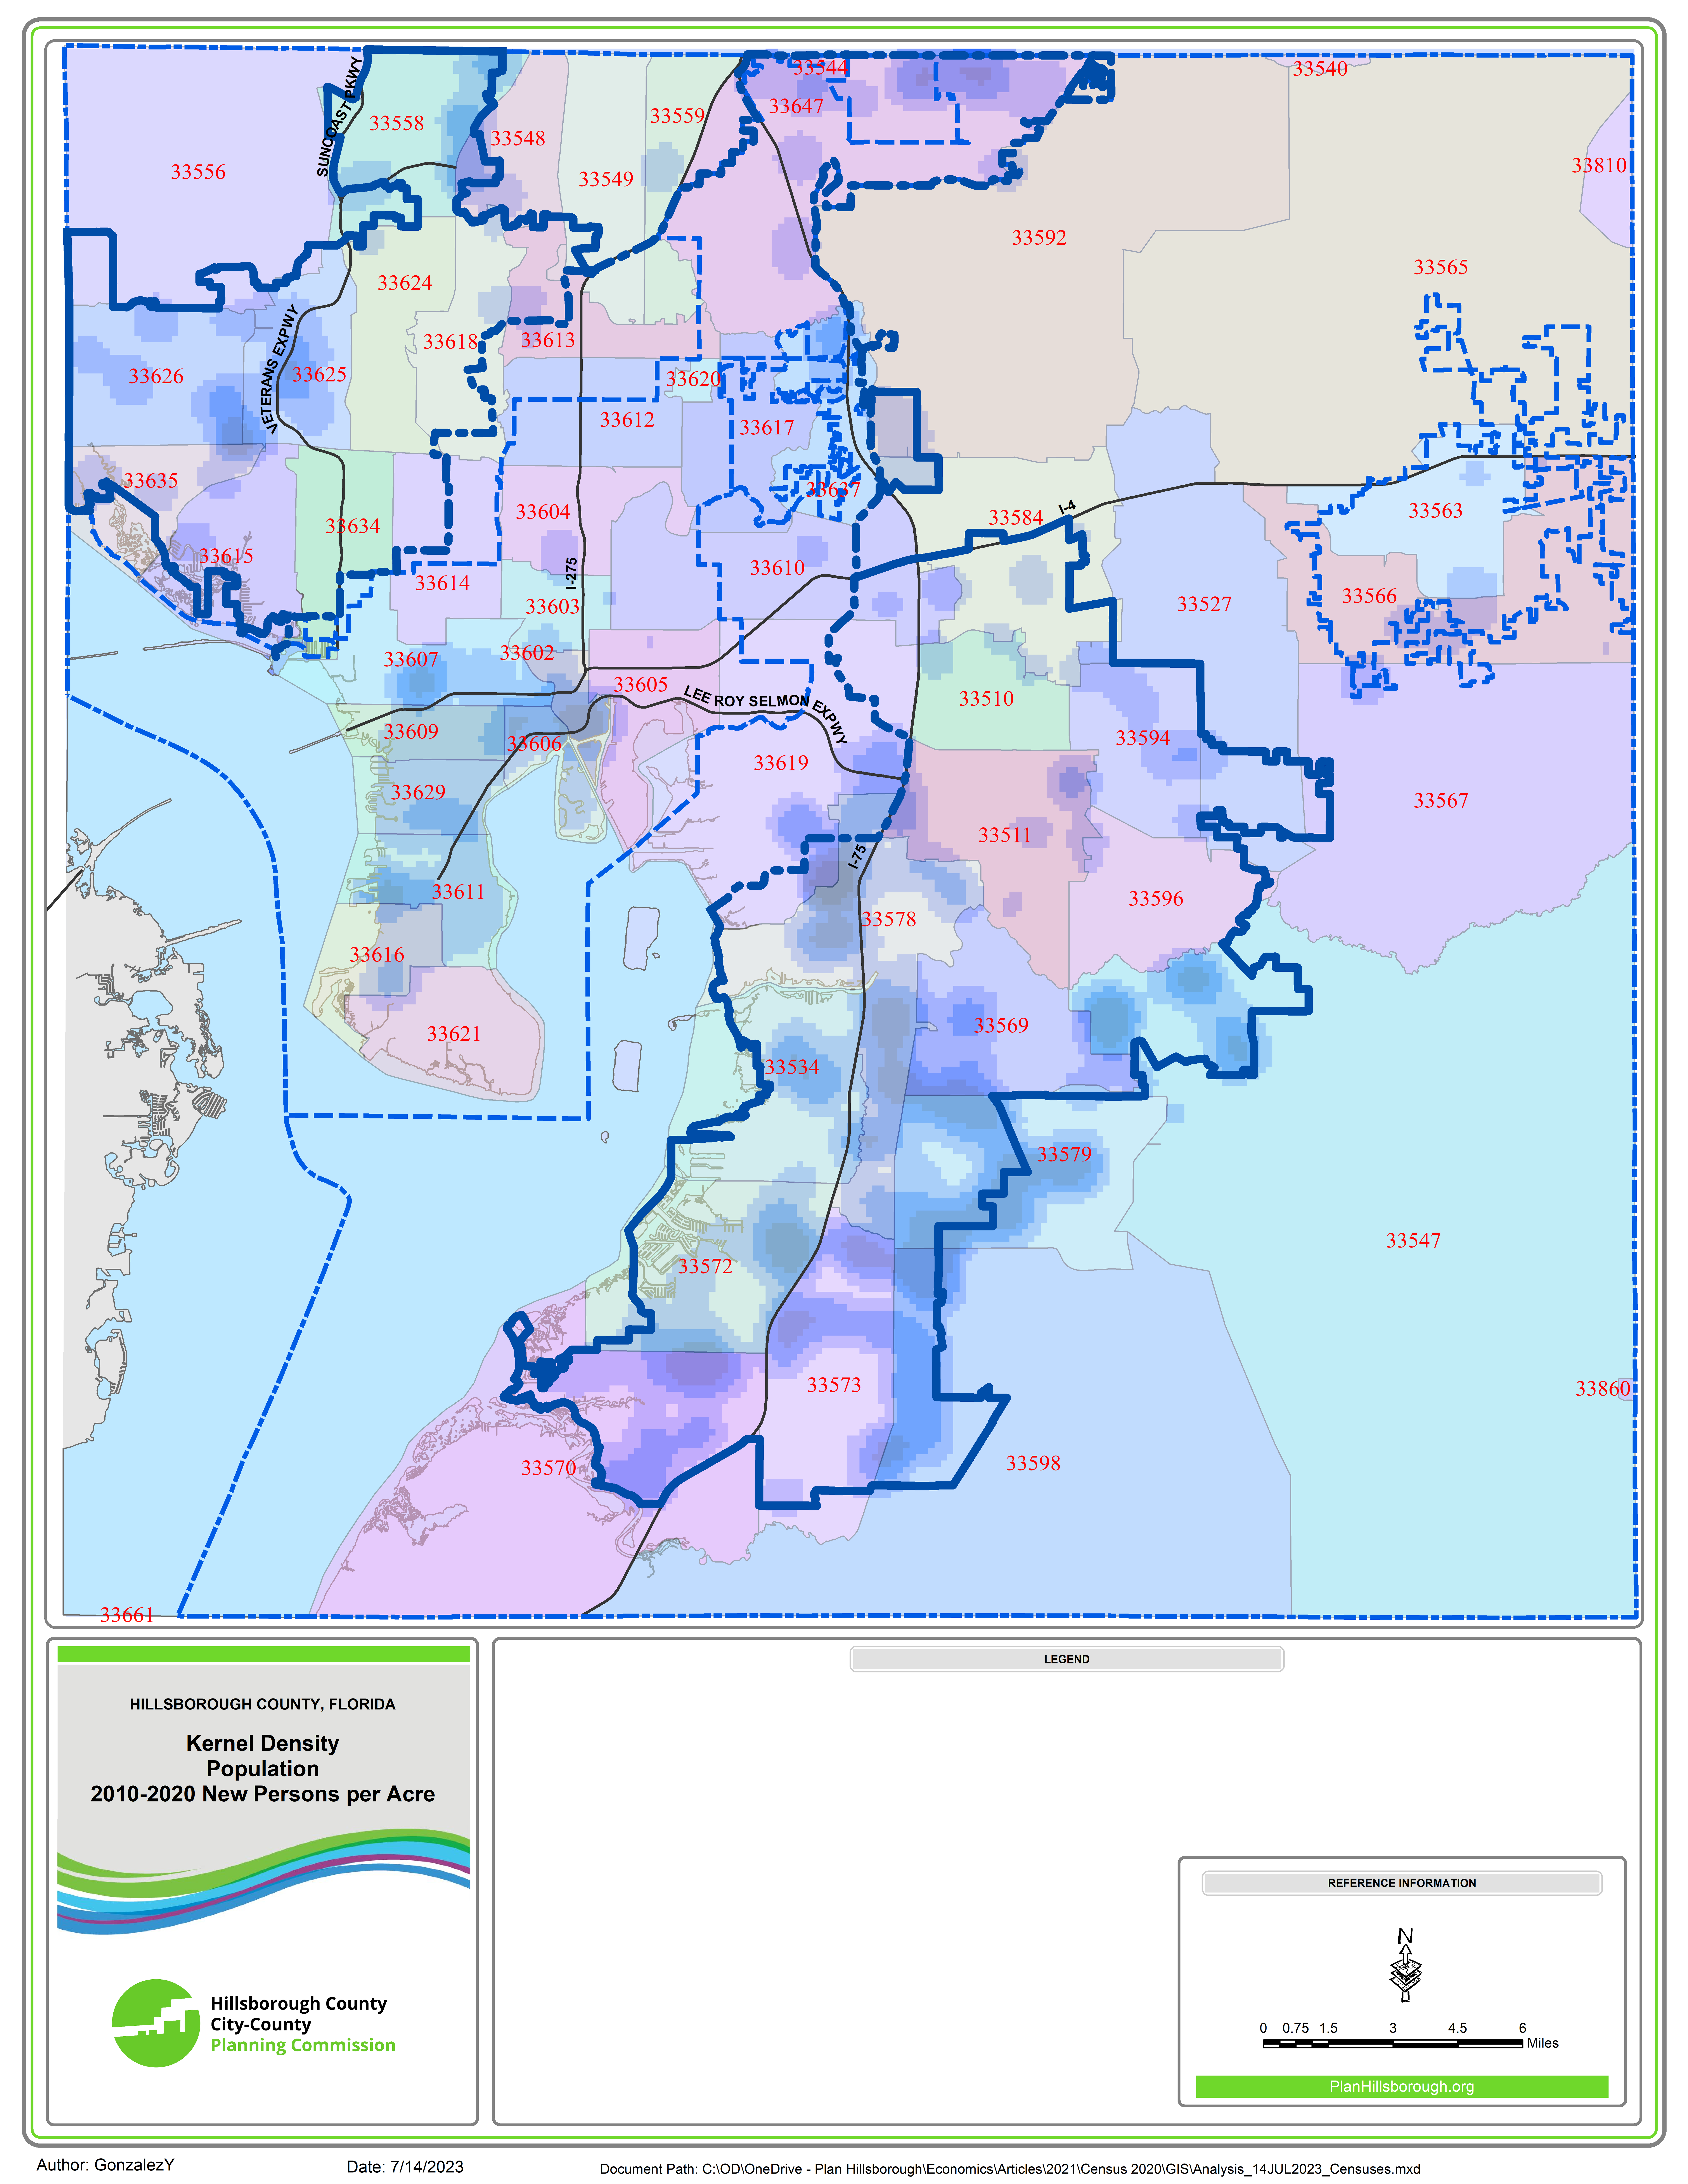 This map shows Hillsborough County ZIP Codes. It also shows kernel density of new residents per acre that arrived from 2010 through 2020. Darker blue areas denote more new residents per acre. Most new residents moved to Tampa, Plant City and the Unincorporated Hillsborough County's Utility Service Areas.